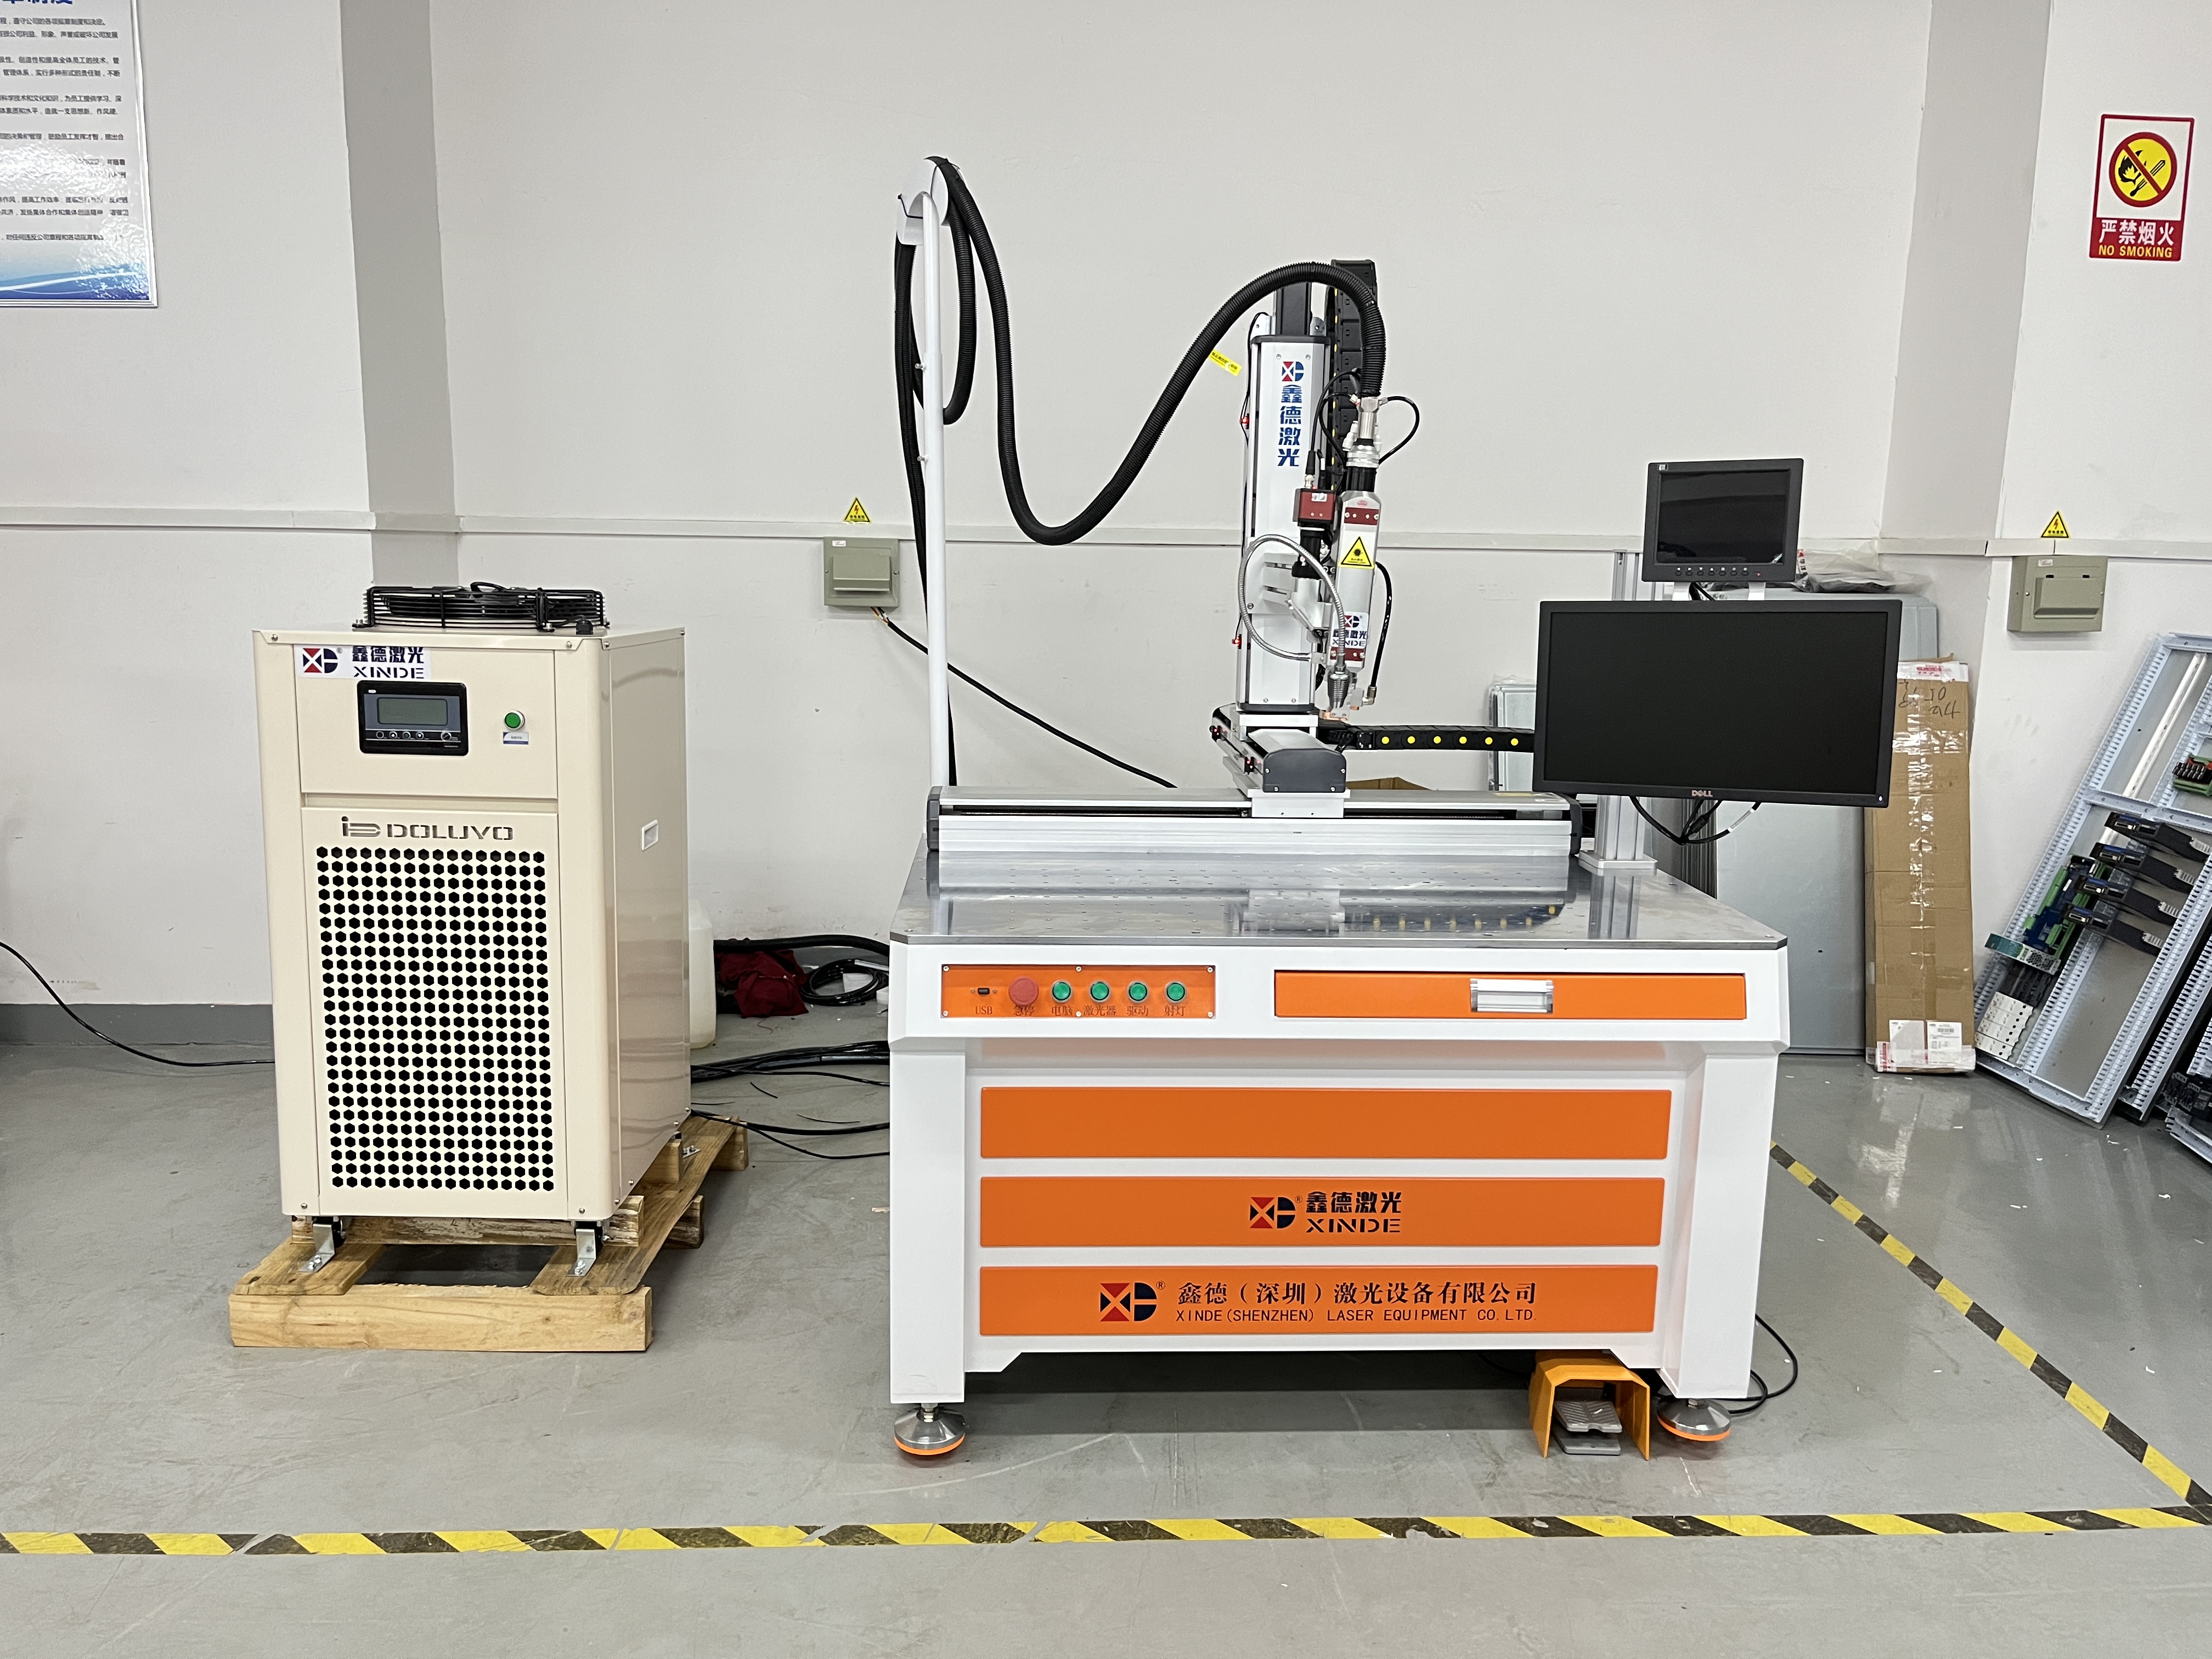 Why should the manufacturing industry introduce laser welding automation equipment?